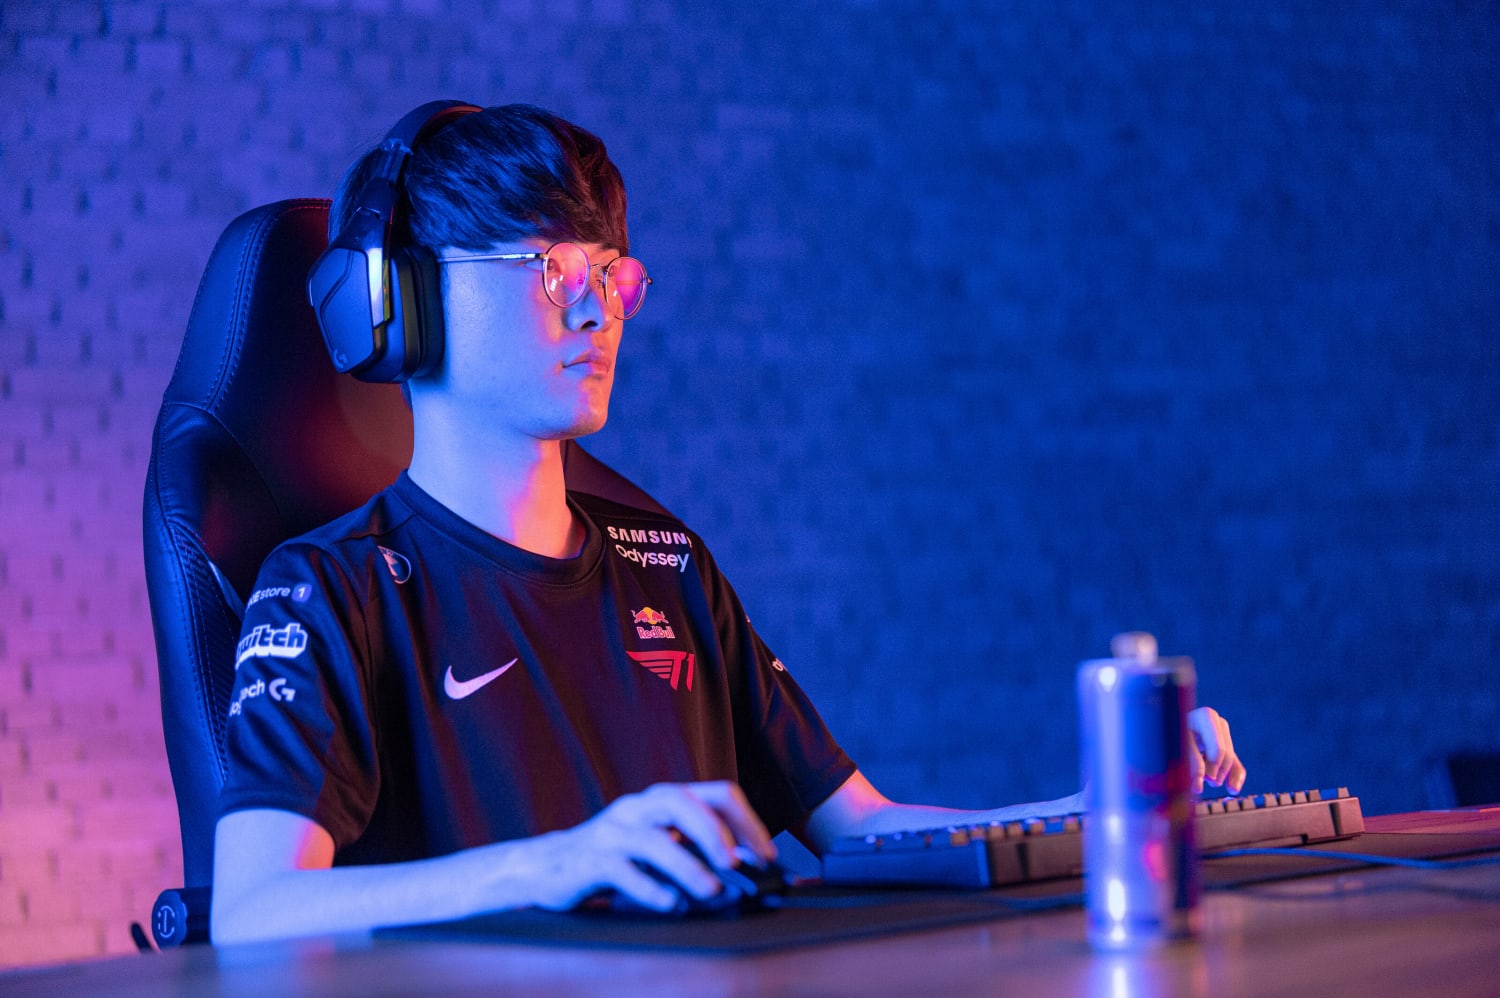 In The Moment: Lee 'Faker' Sang-hyeok LCK debut – video